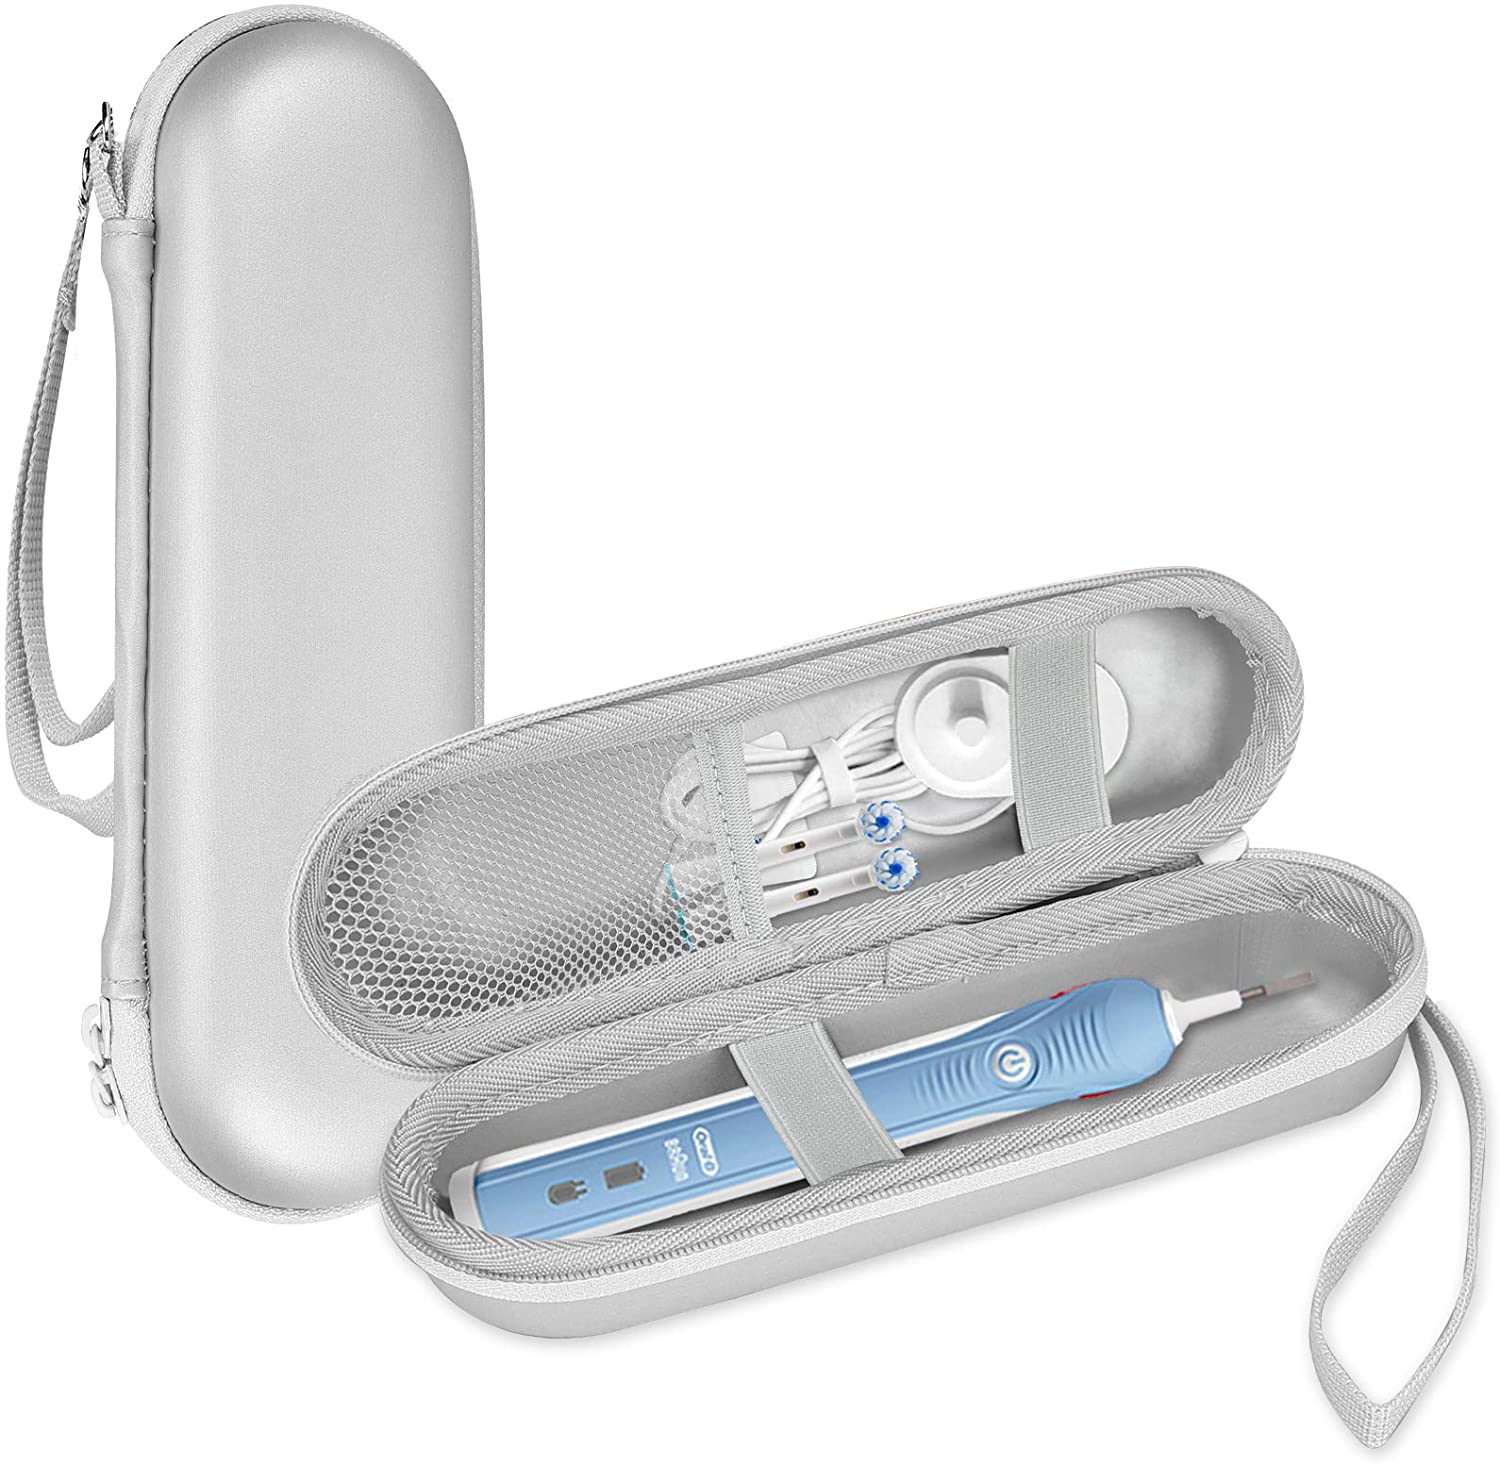 Electric Toothbrush Hard Travel Case Fit for Oral-b Pro 1000 | ProCase silver